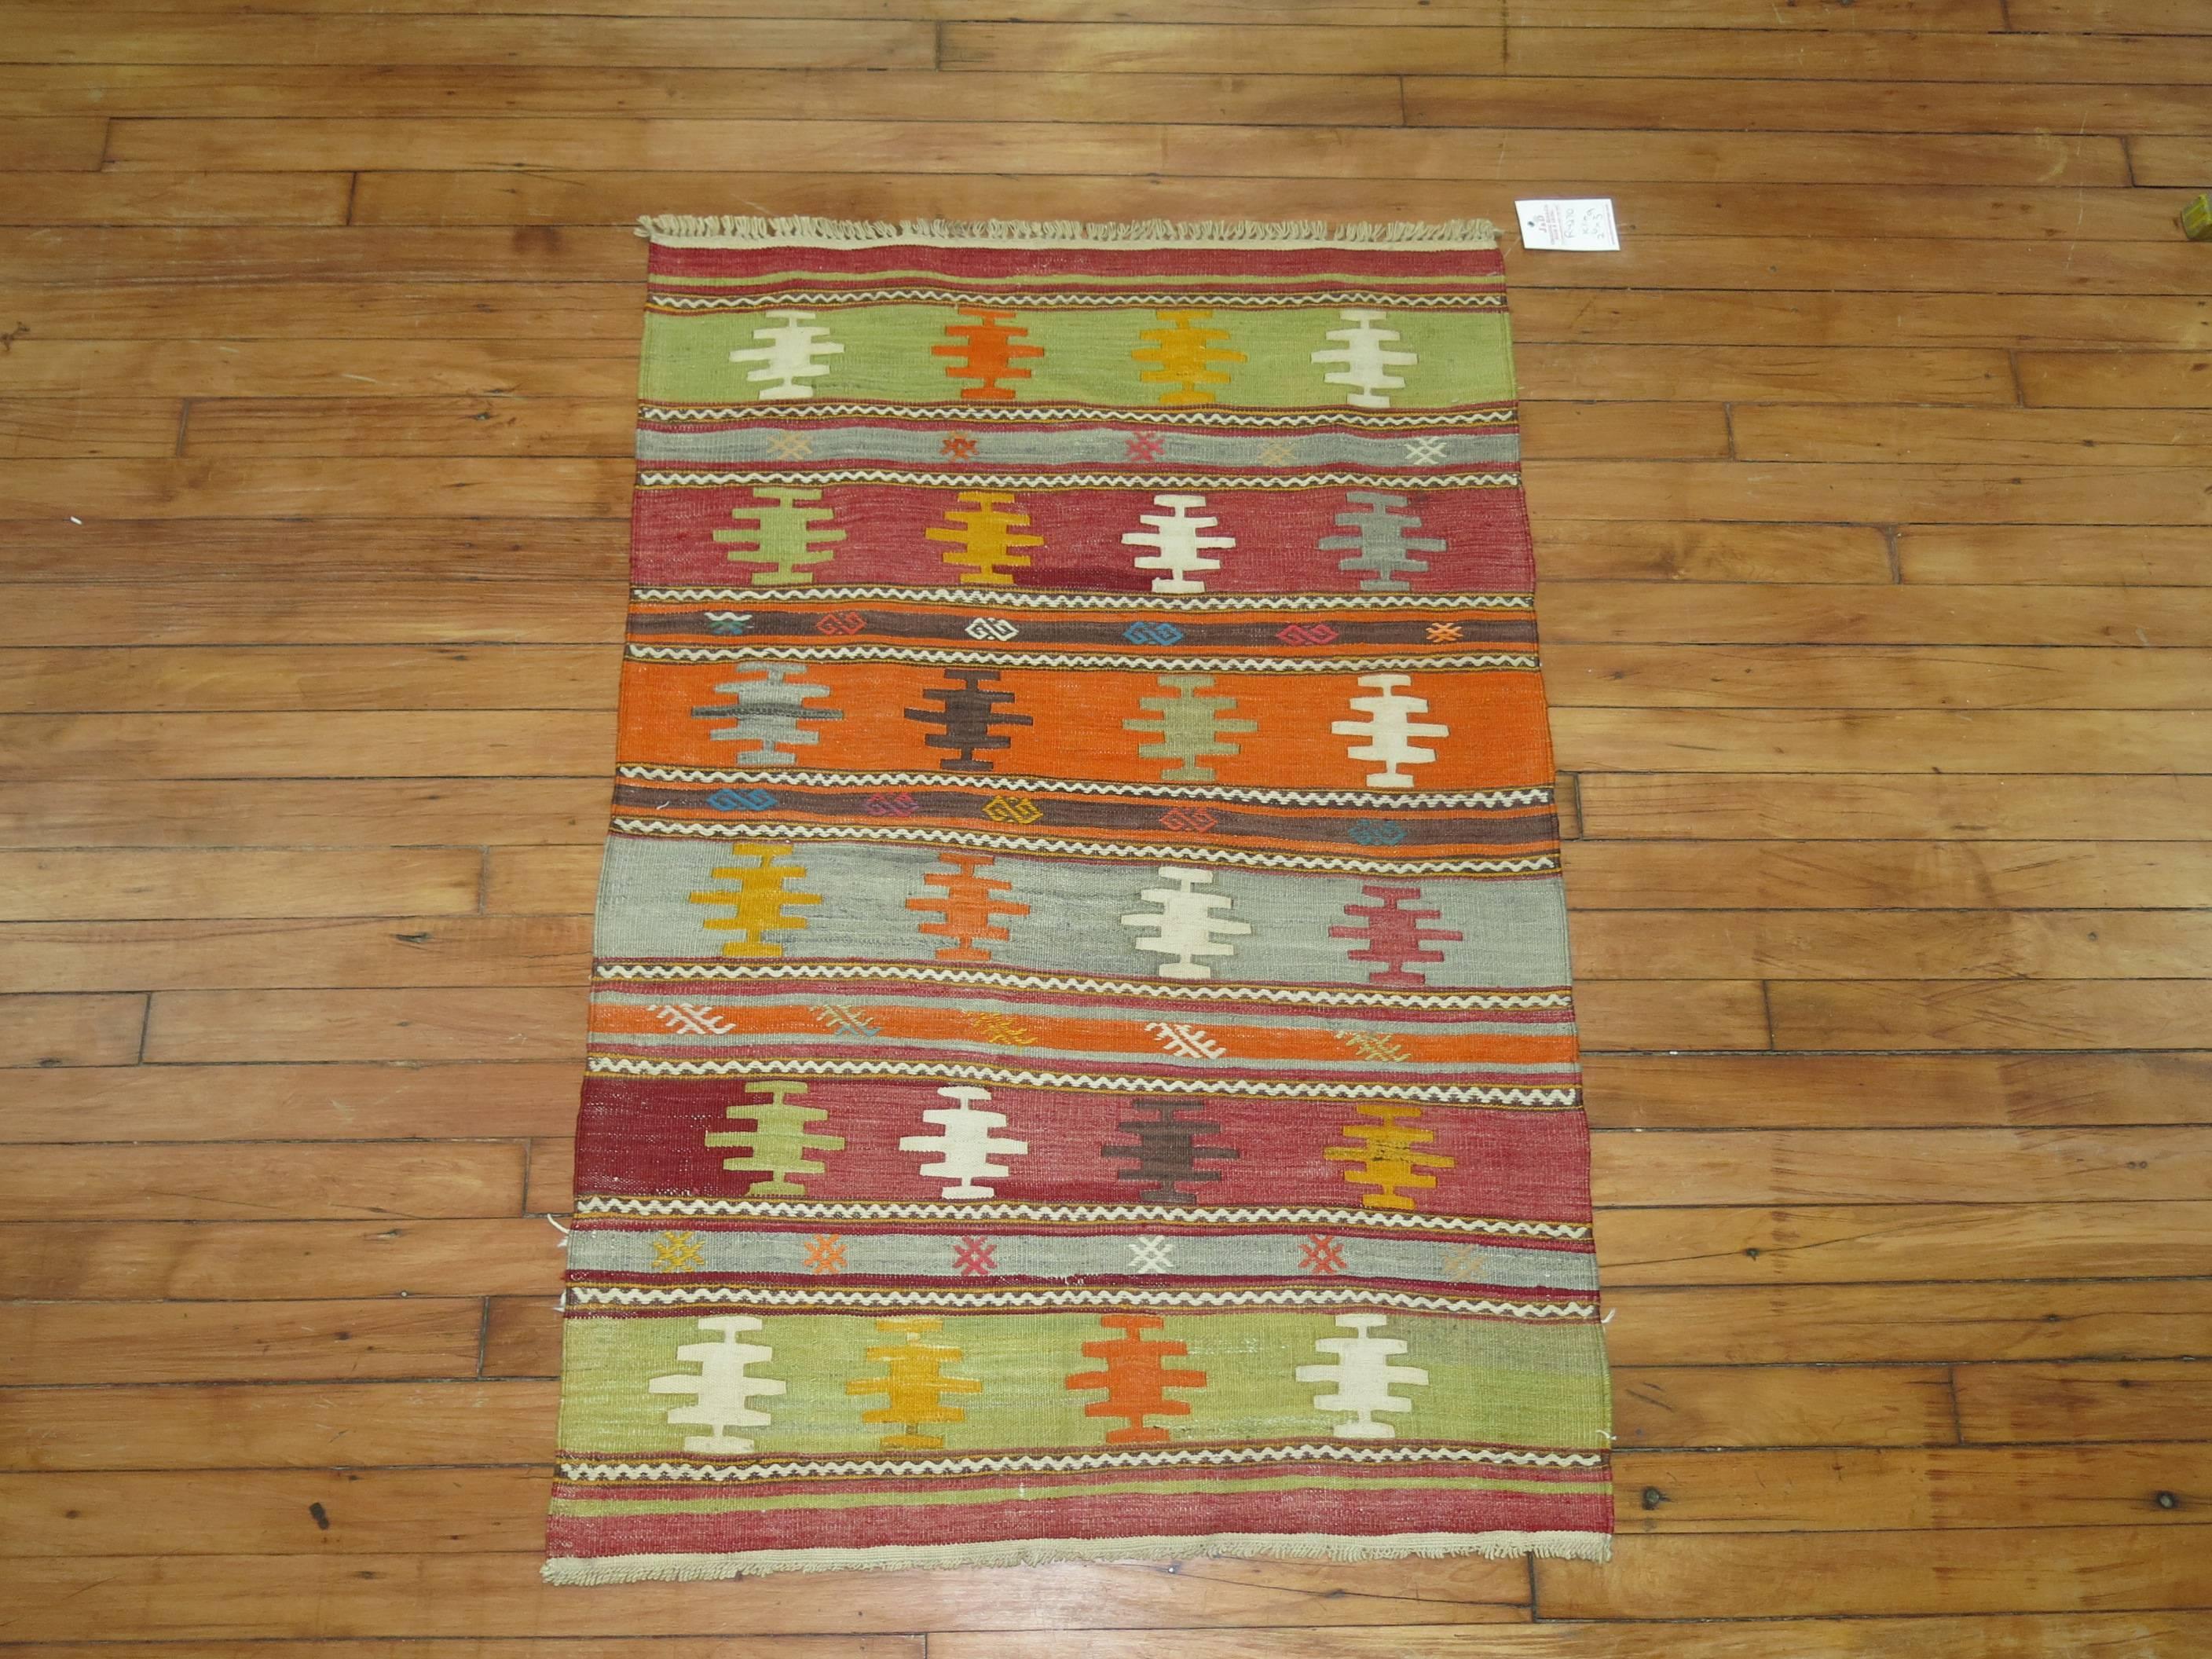 A vintage Turkish Kilim scatter rug from the middle of the 20th century.